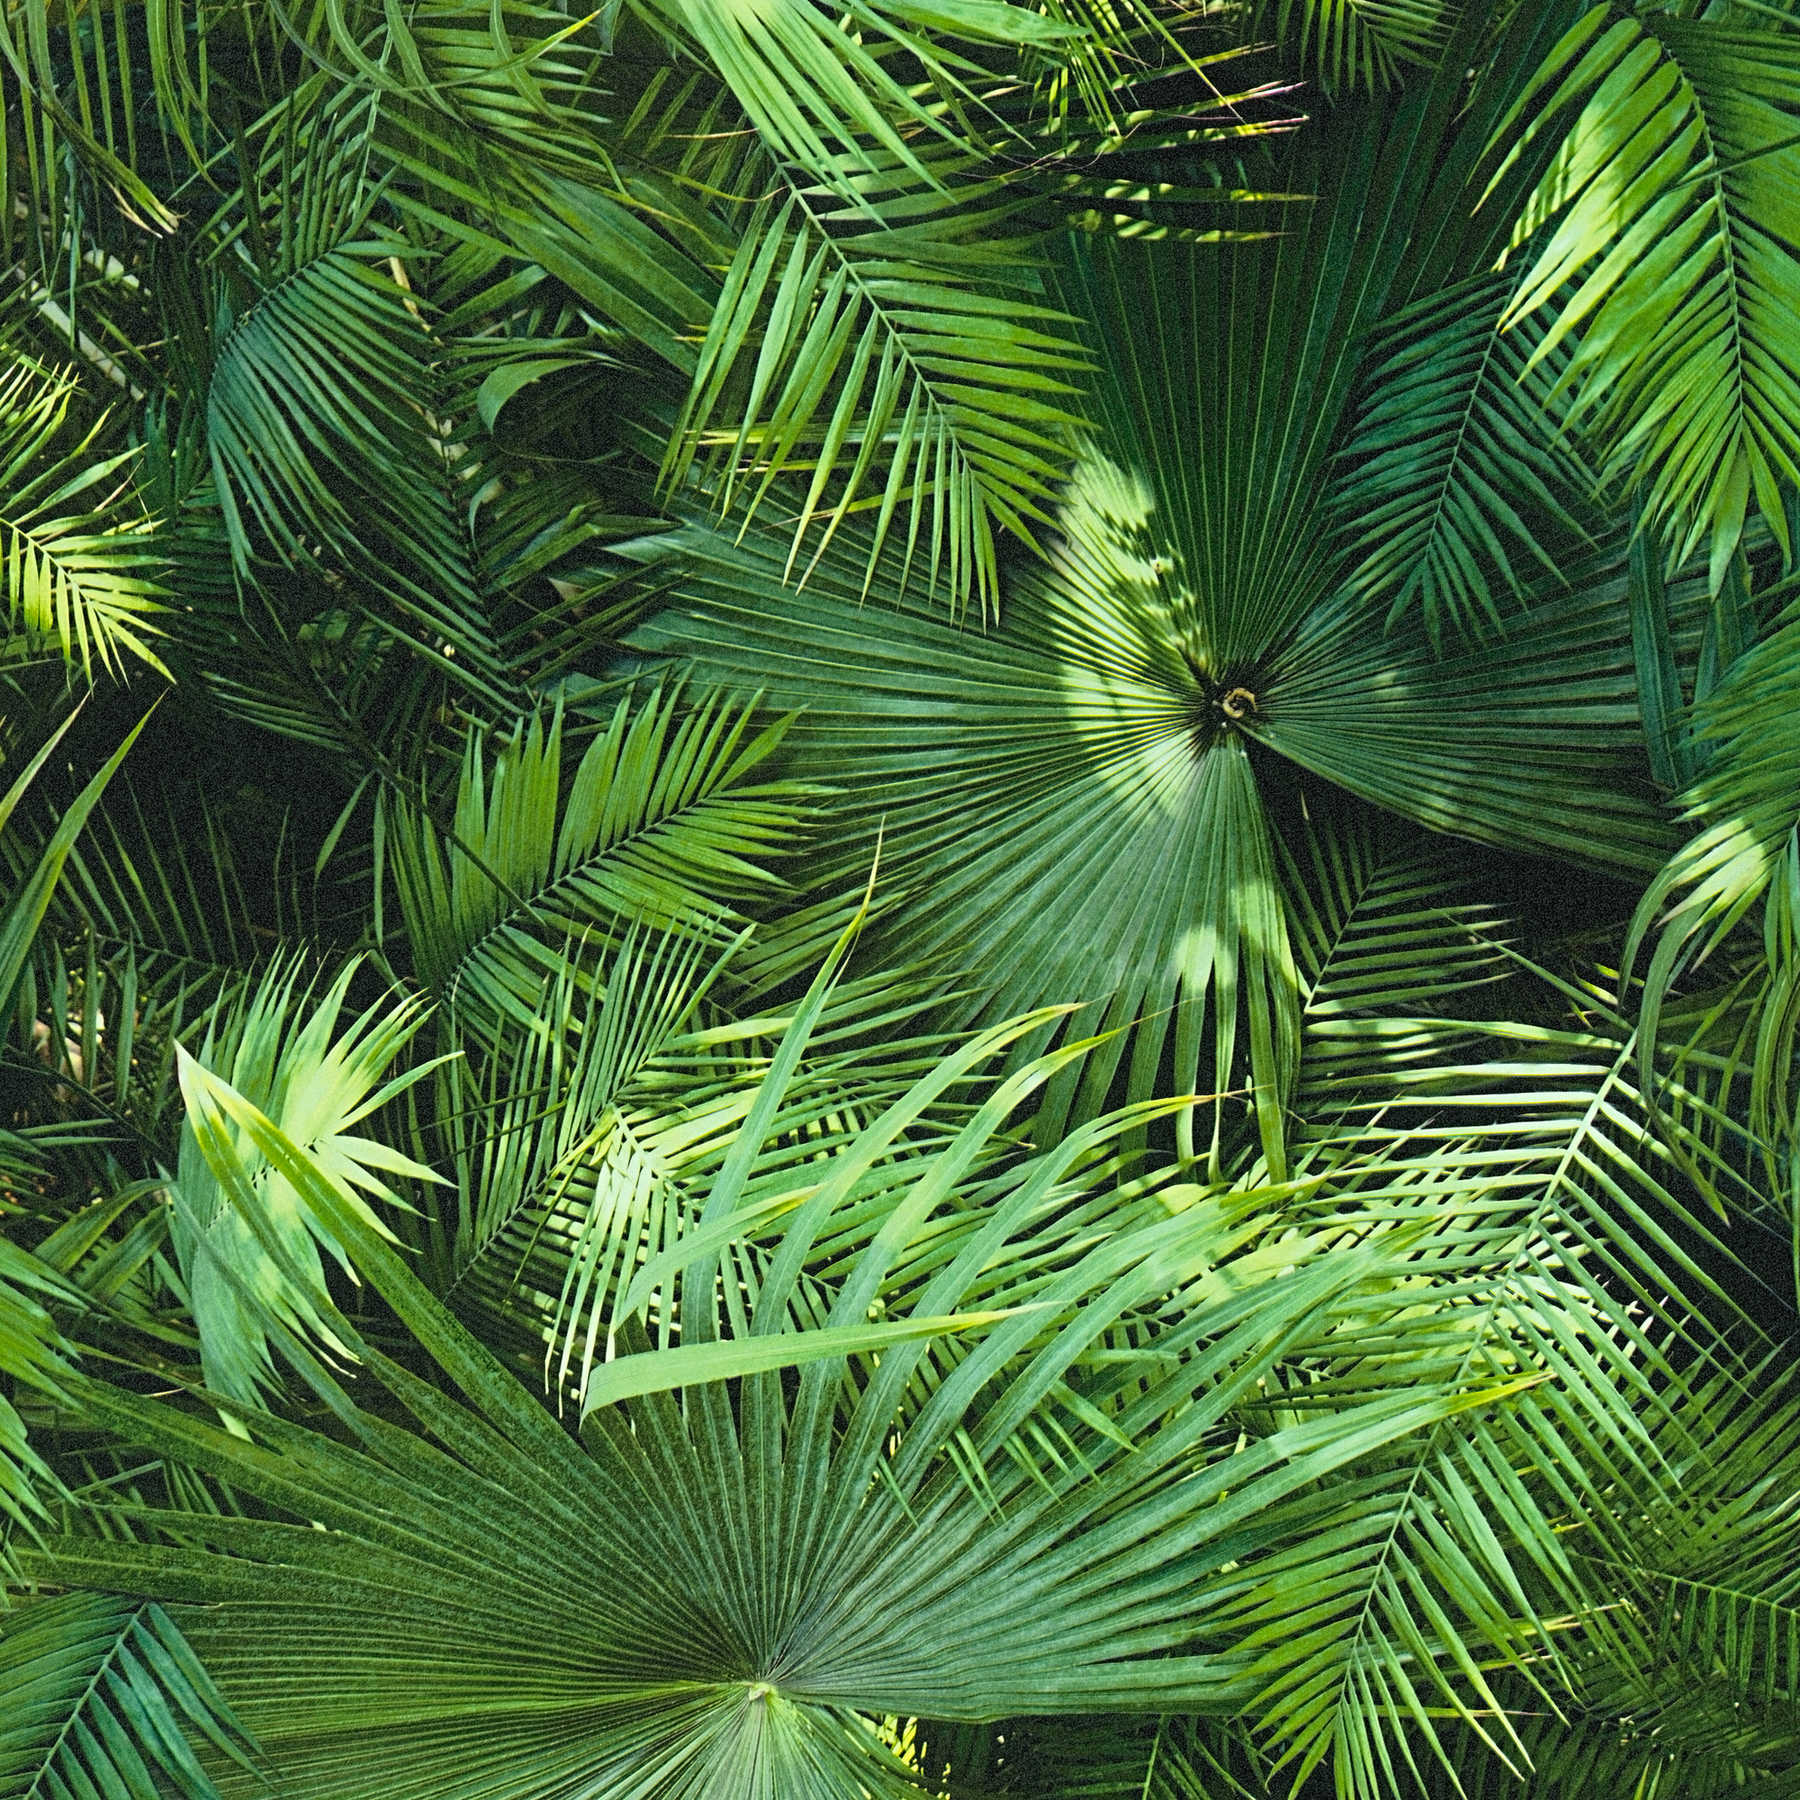             Jungle wallpaper with tropical ferns - green, black
        